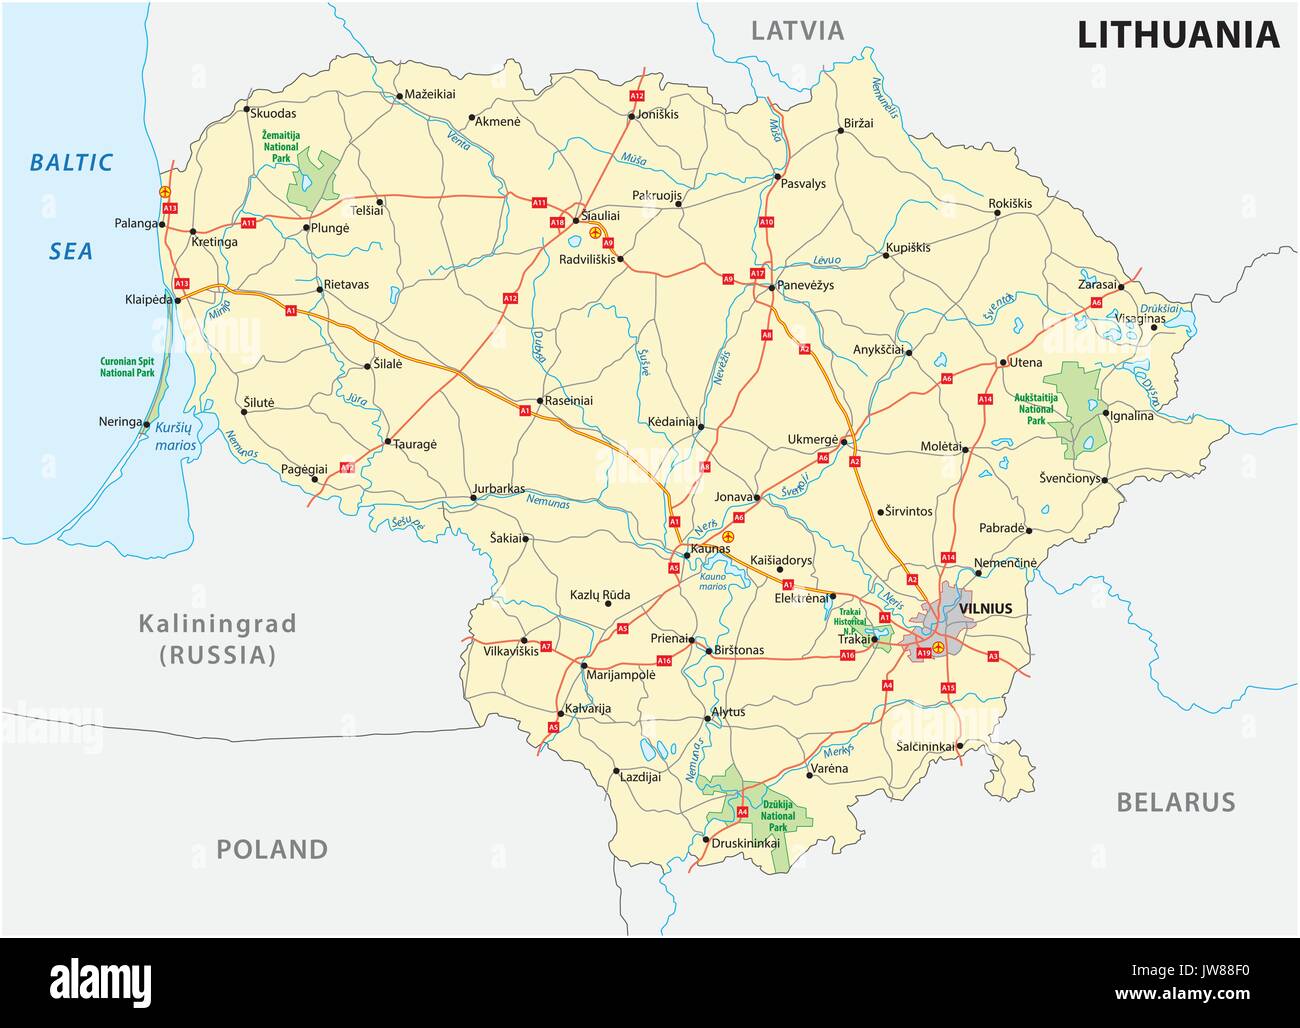 Lithuania road and national park map Stock Vector